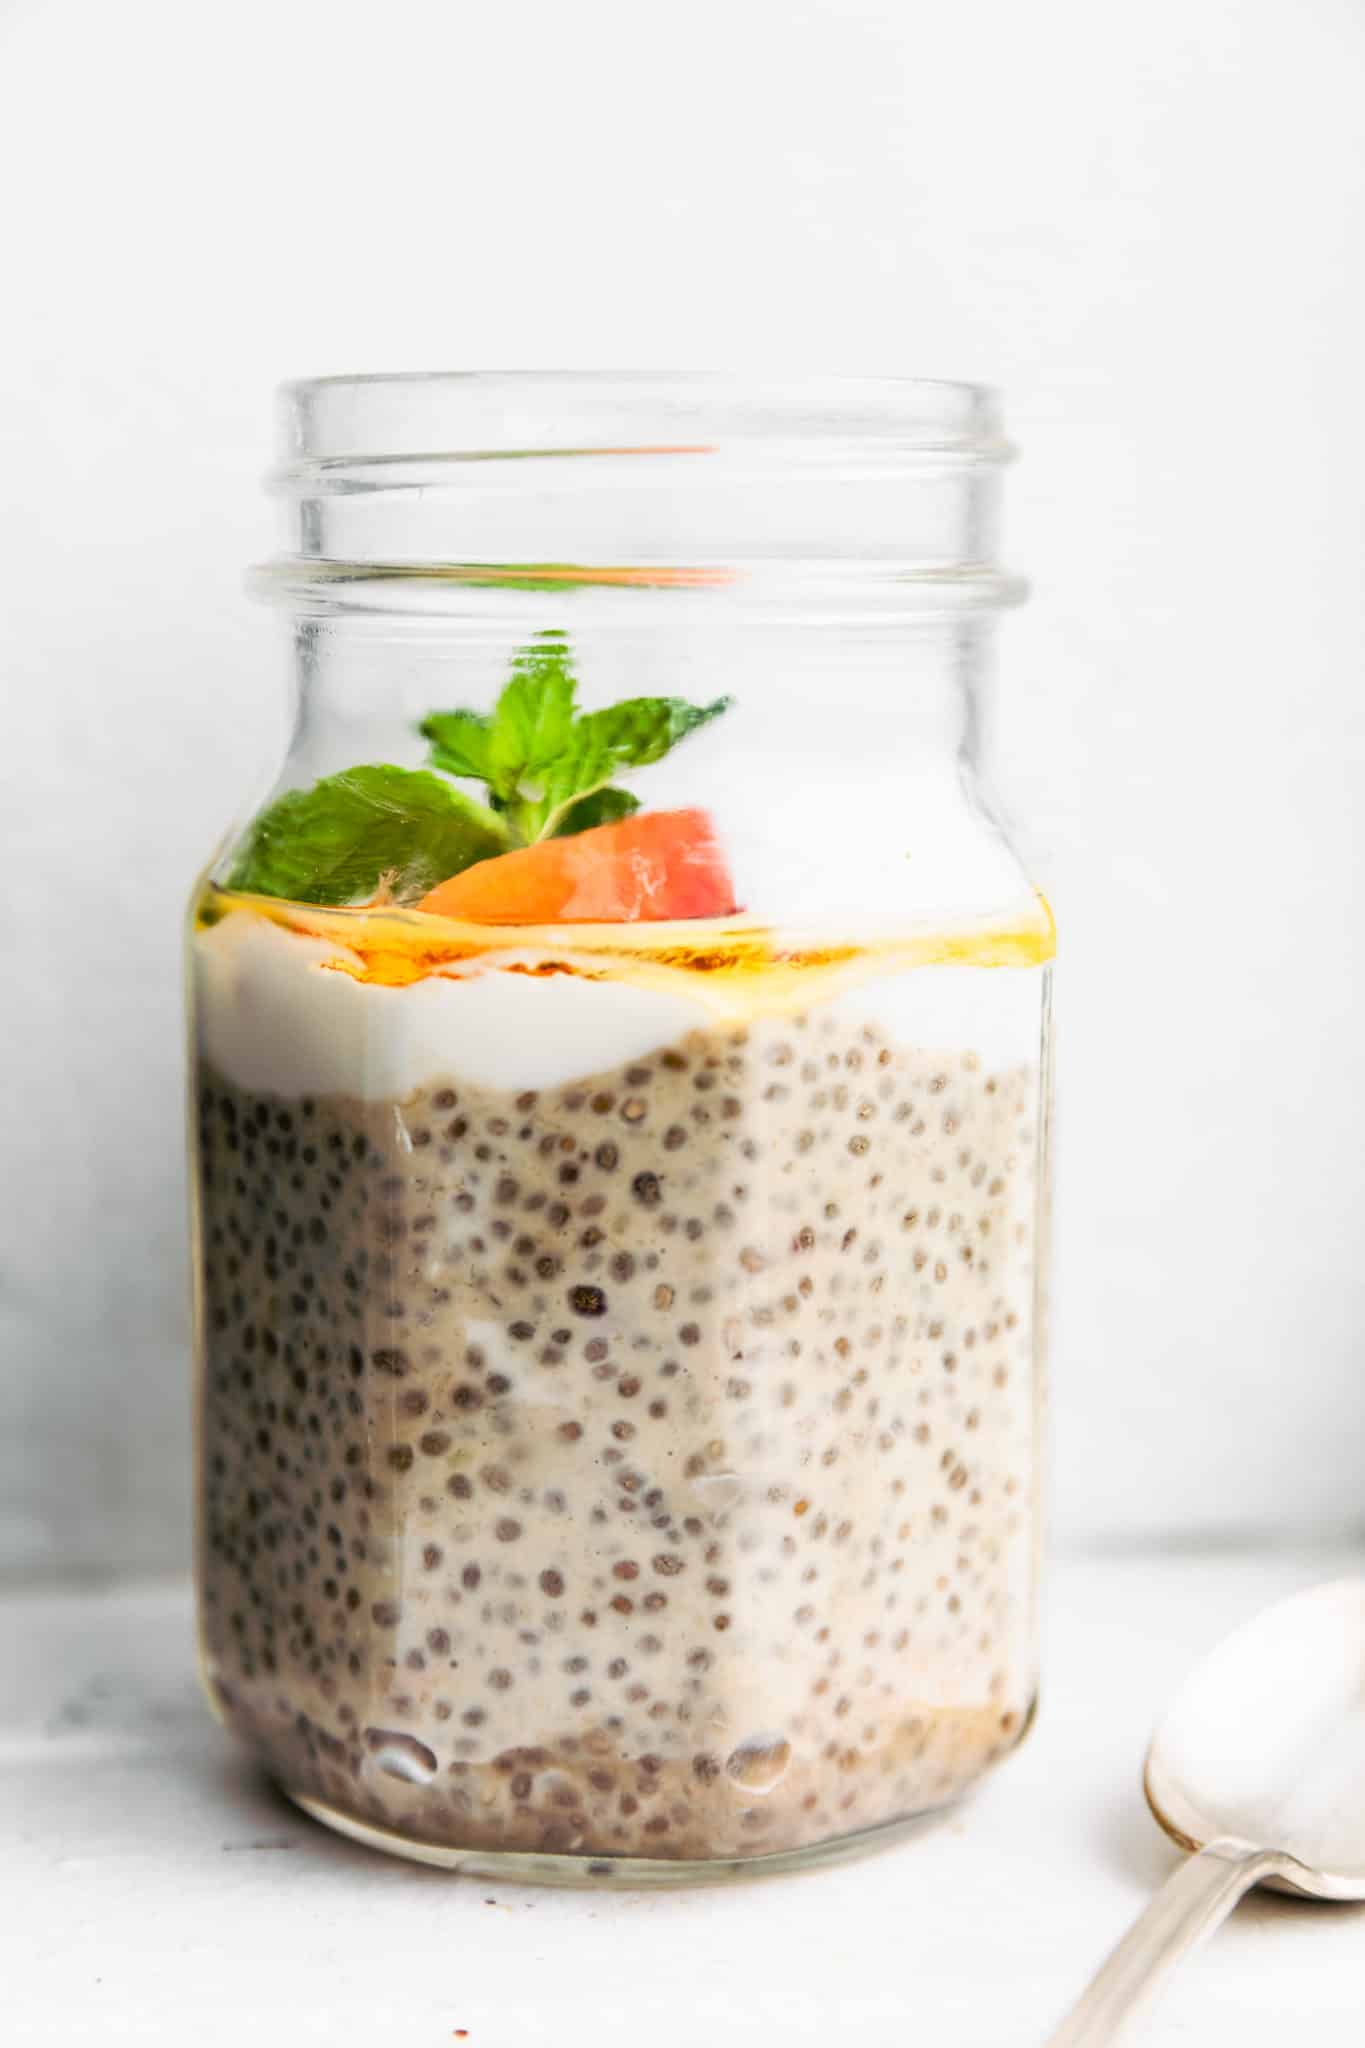 https://www.cottercrunch.com/wp-content/uploads/2022/08/2-How-to-make-chia-pudding-with-protein-update-3-scaled.jpg